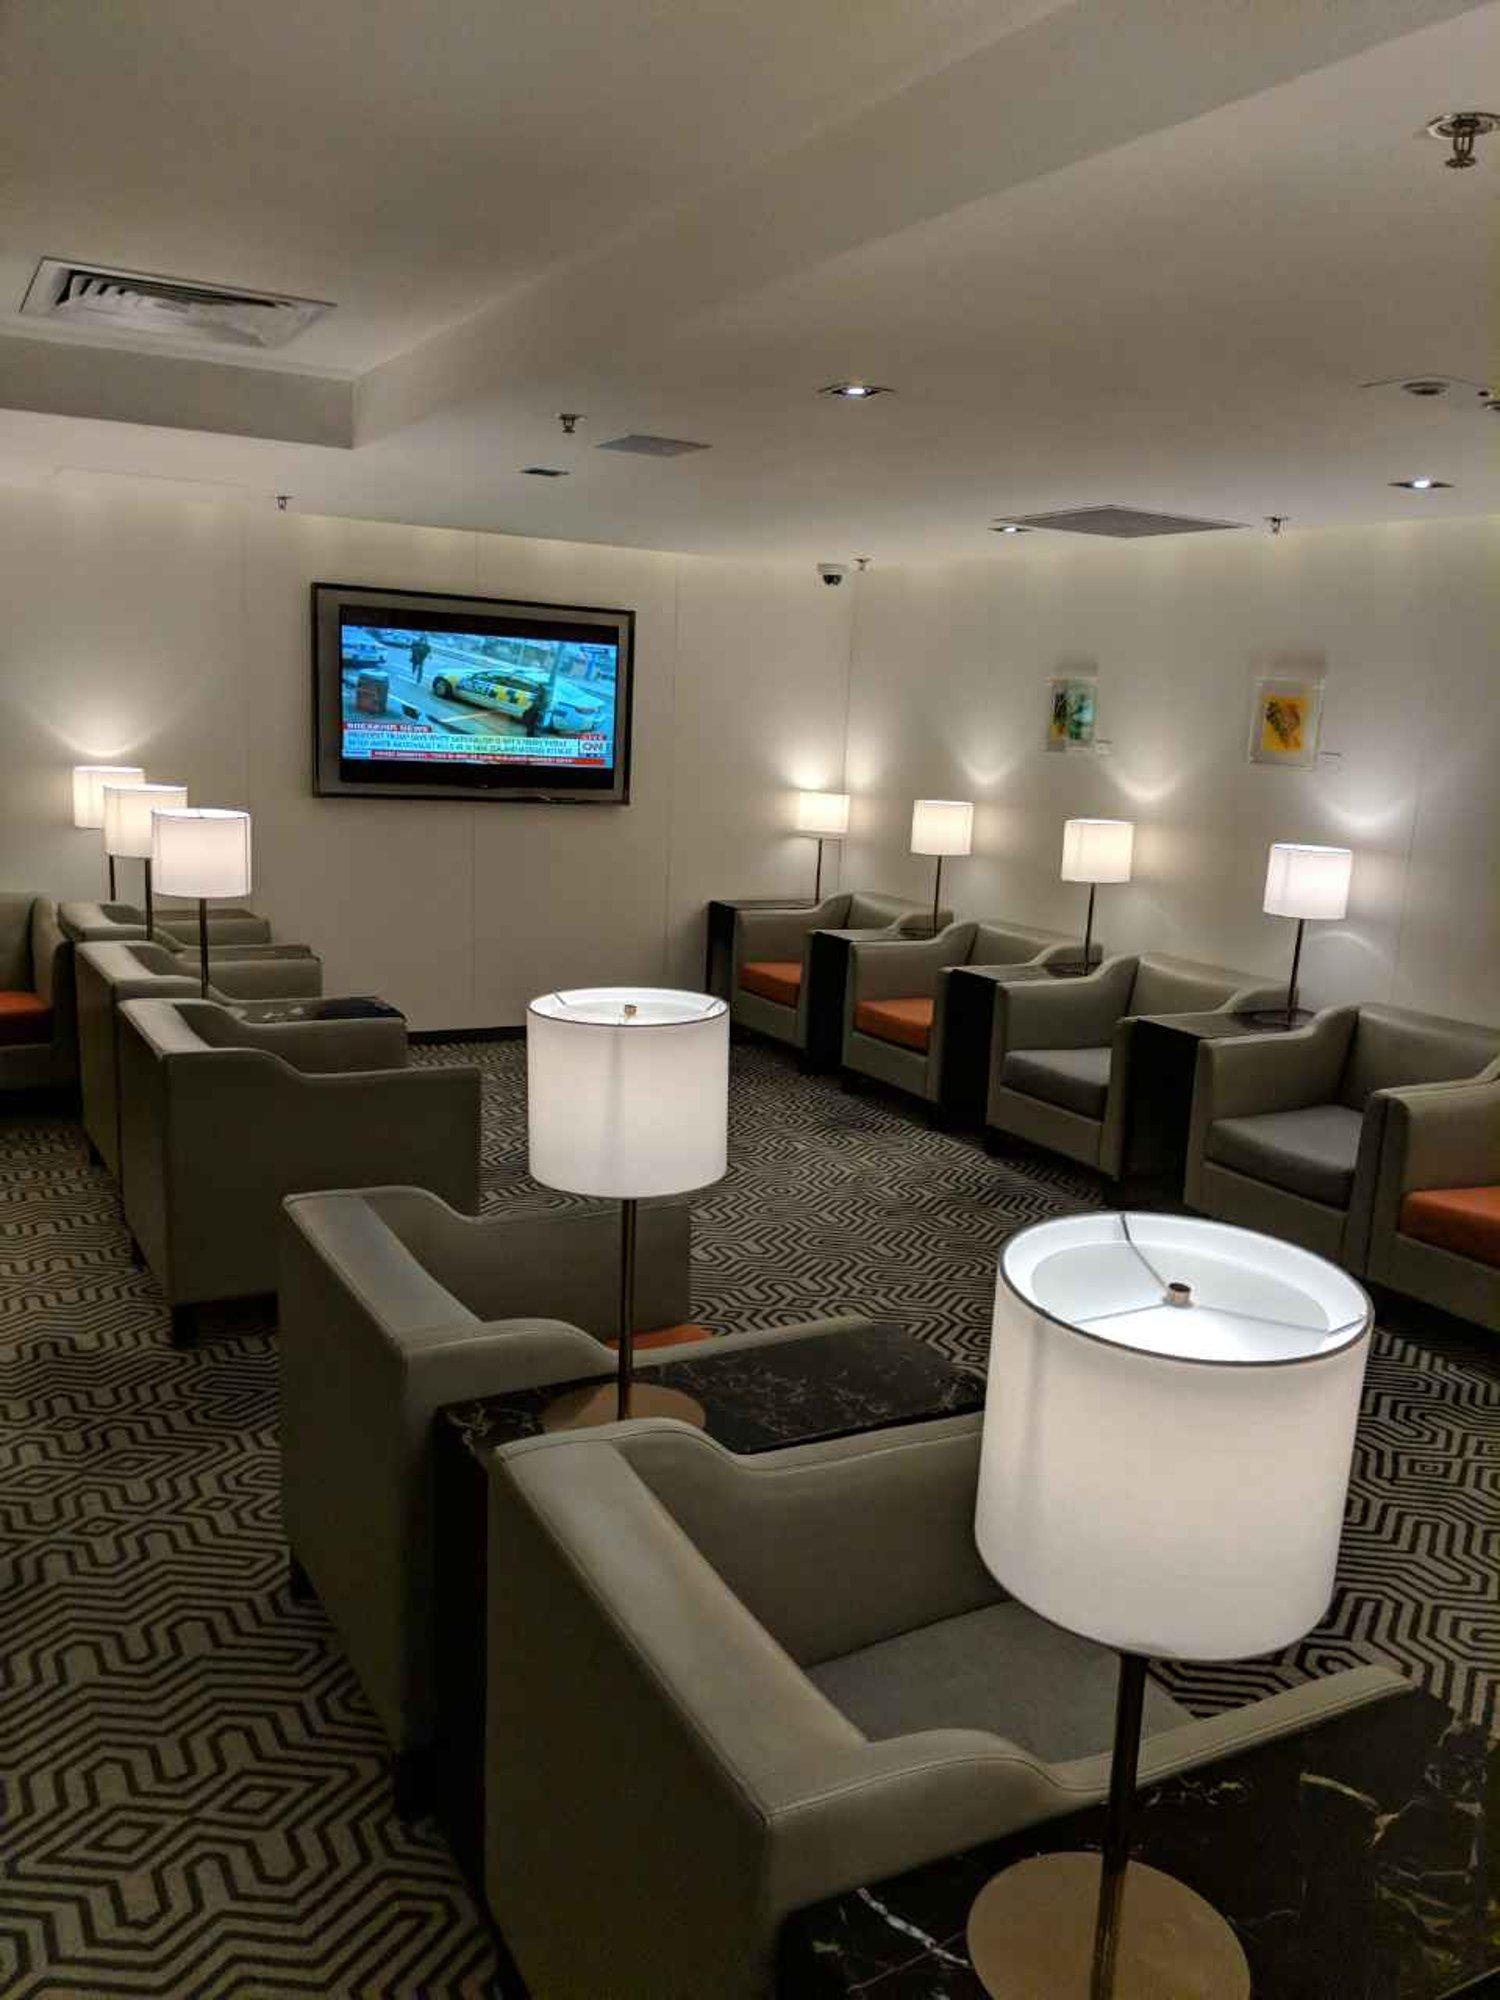 Singapore Airlines SilverKris Business Class Lounge image 26 of 68